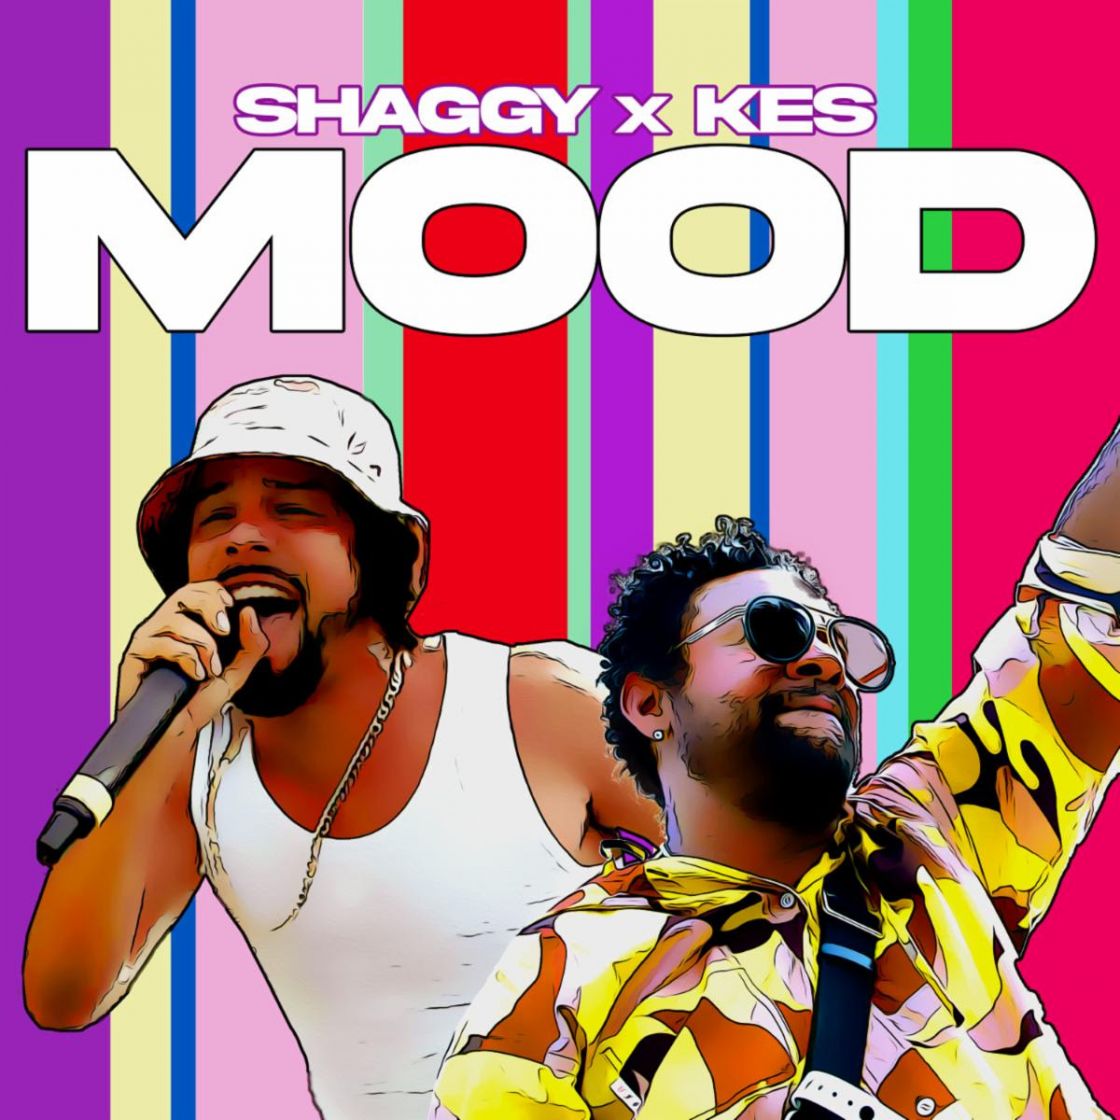 New Music by Shaggy featuring Kes